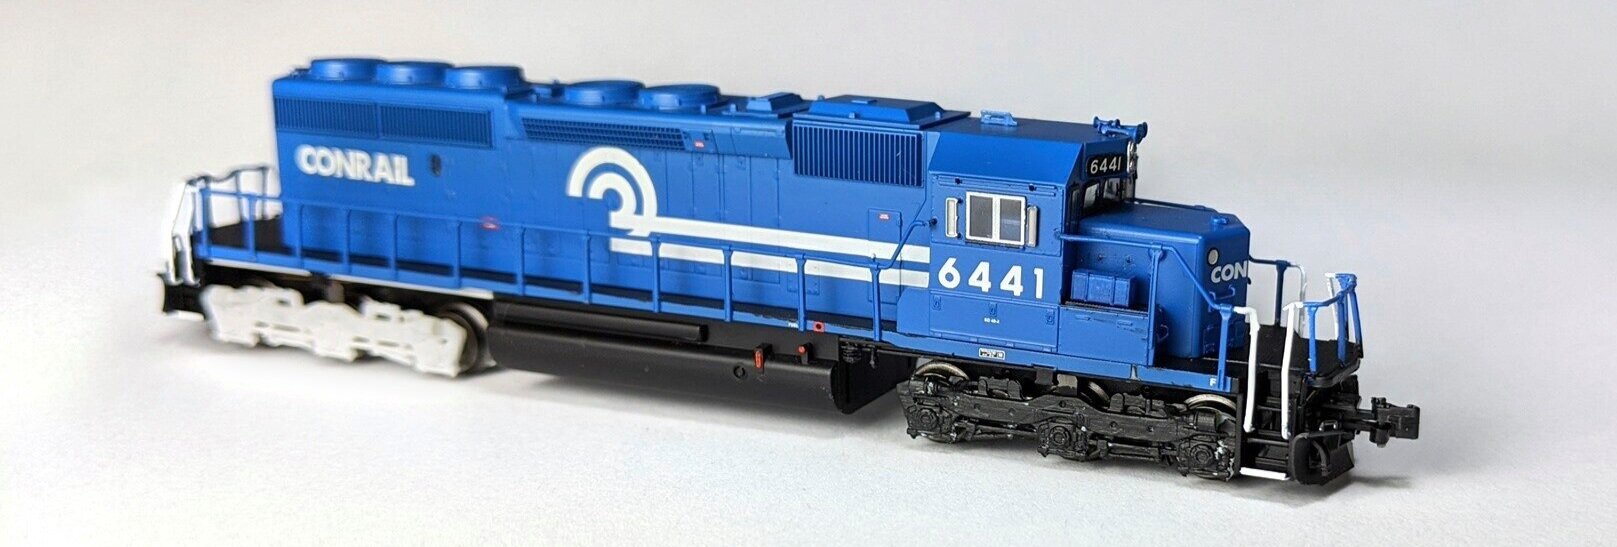 Details about   N scale  Conrail 4 window Caboose  Conrail  18832 